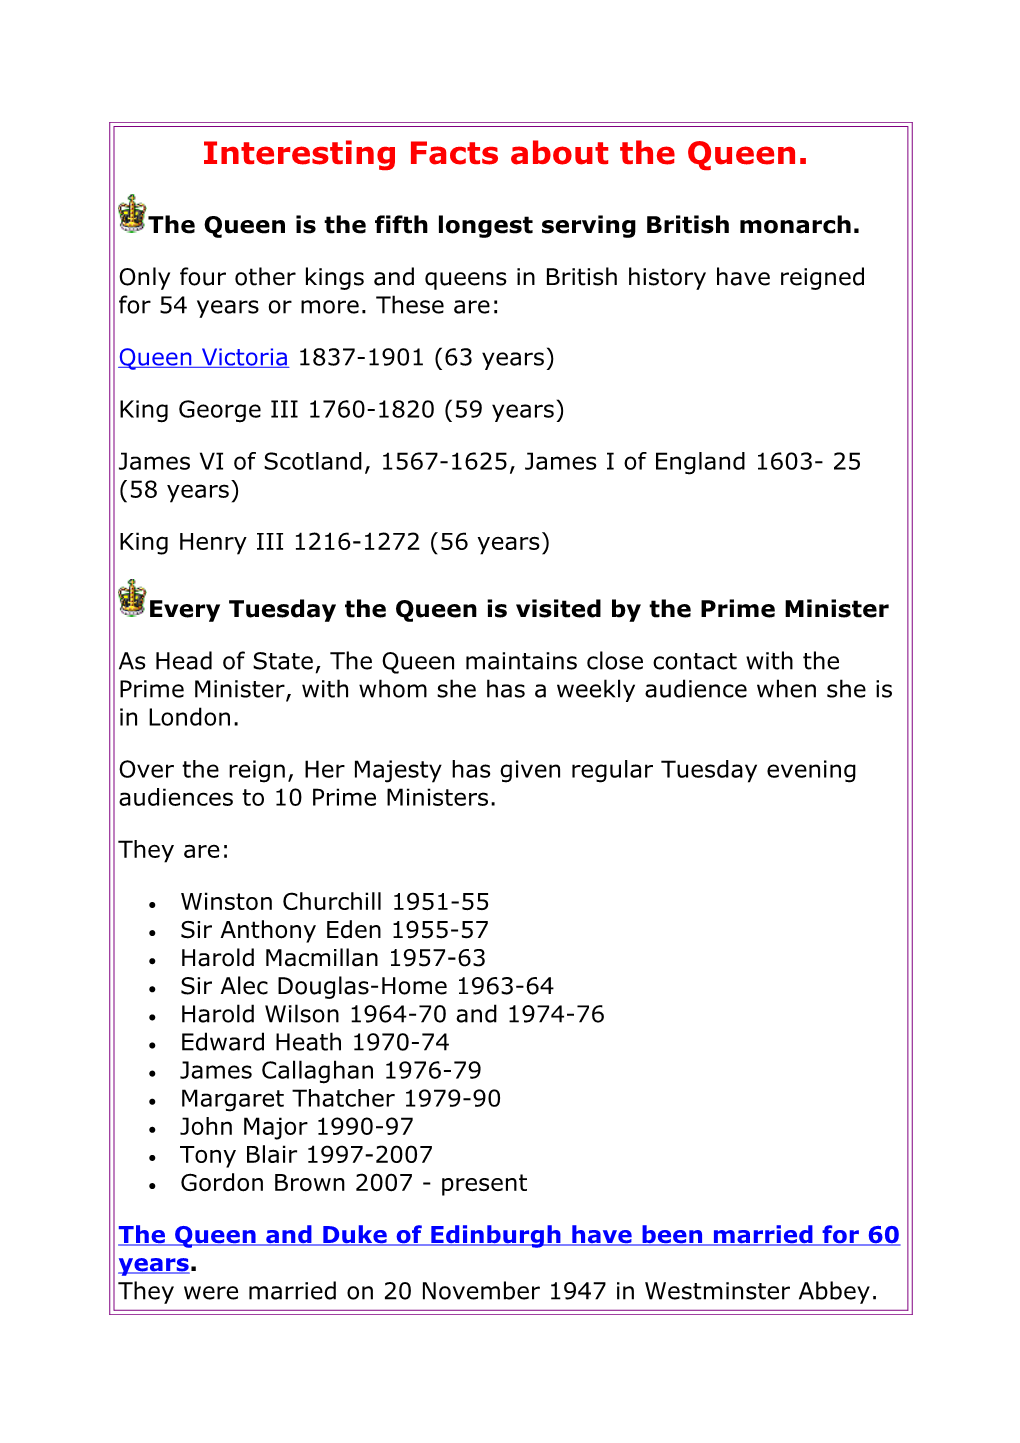 Interesting Facts About the Queen